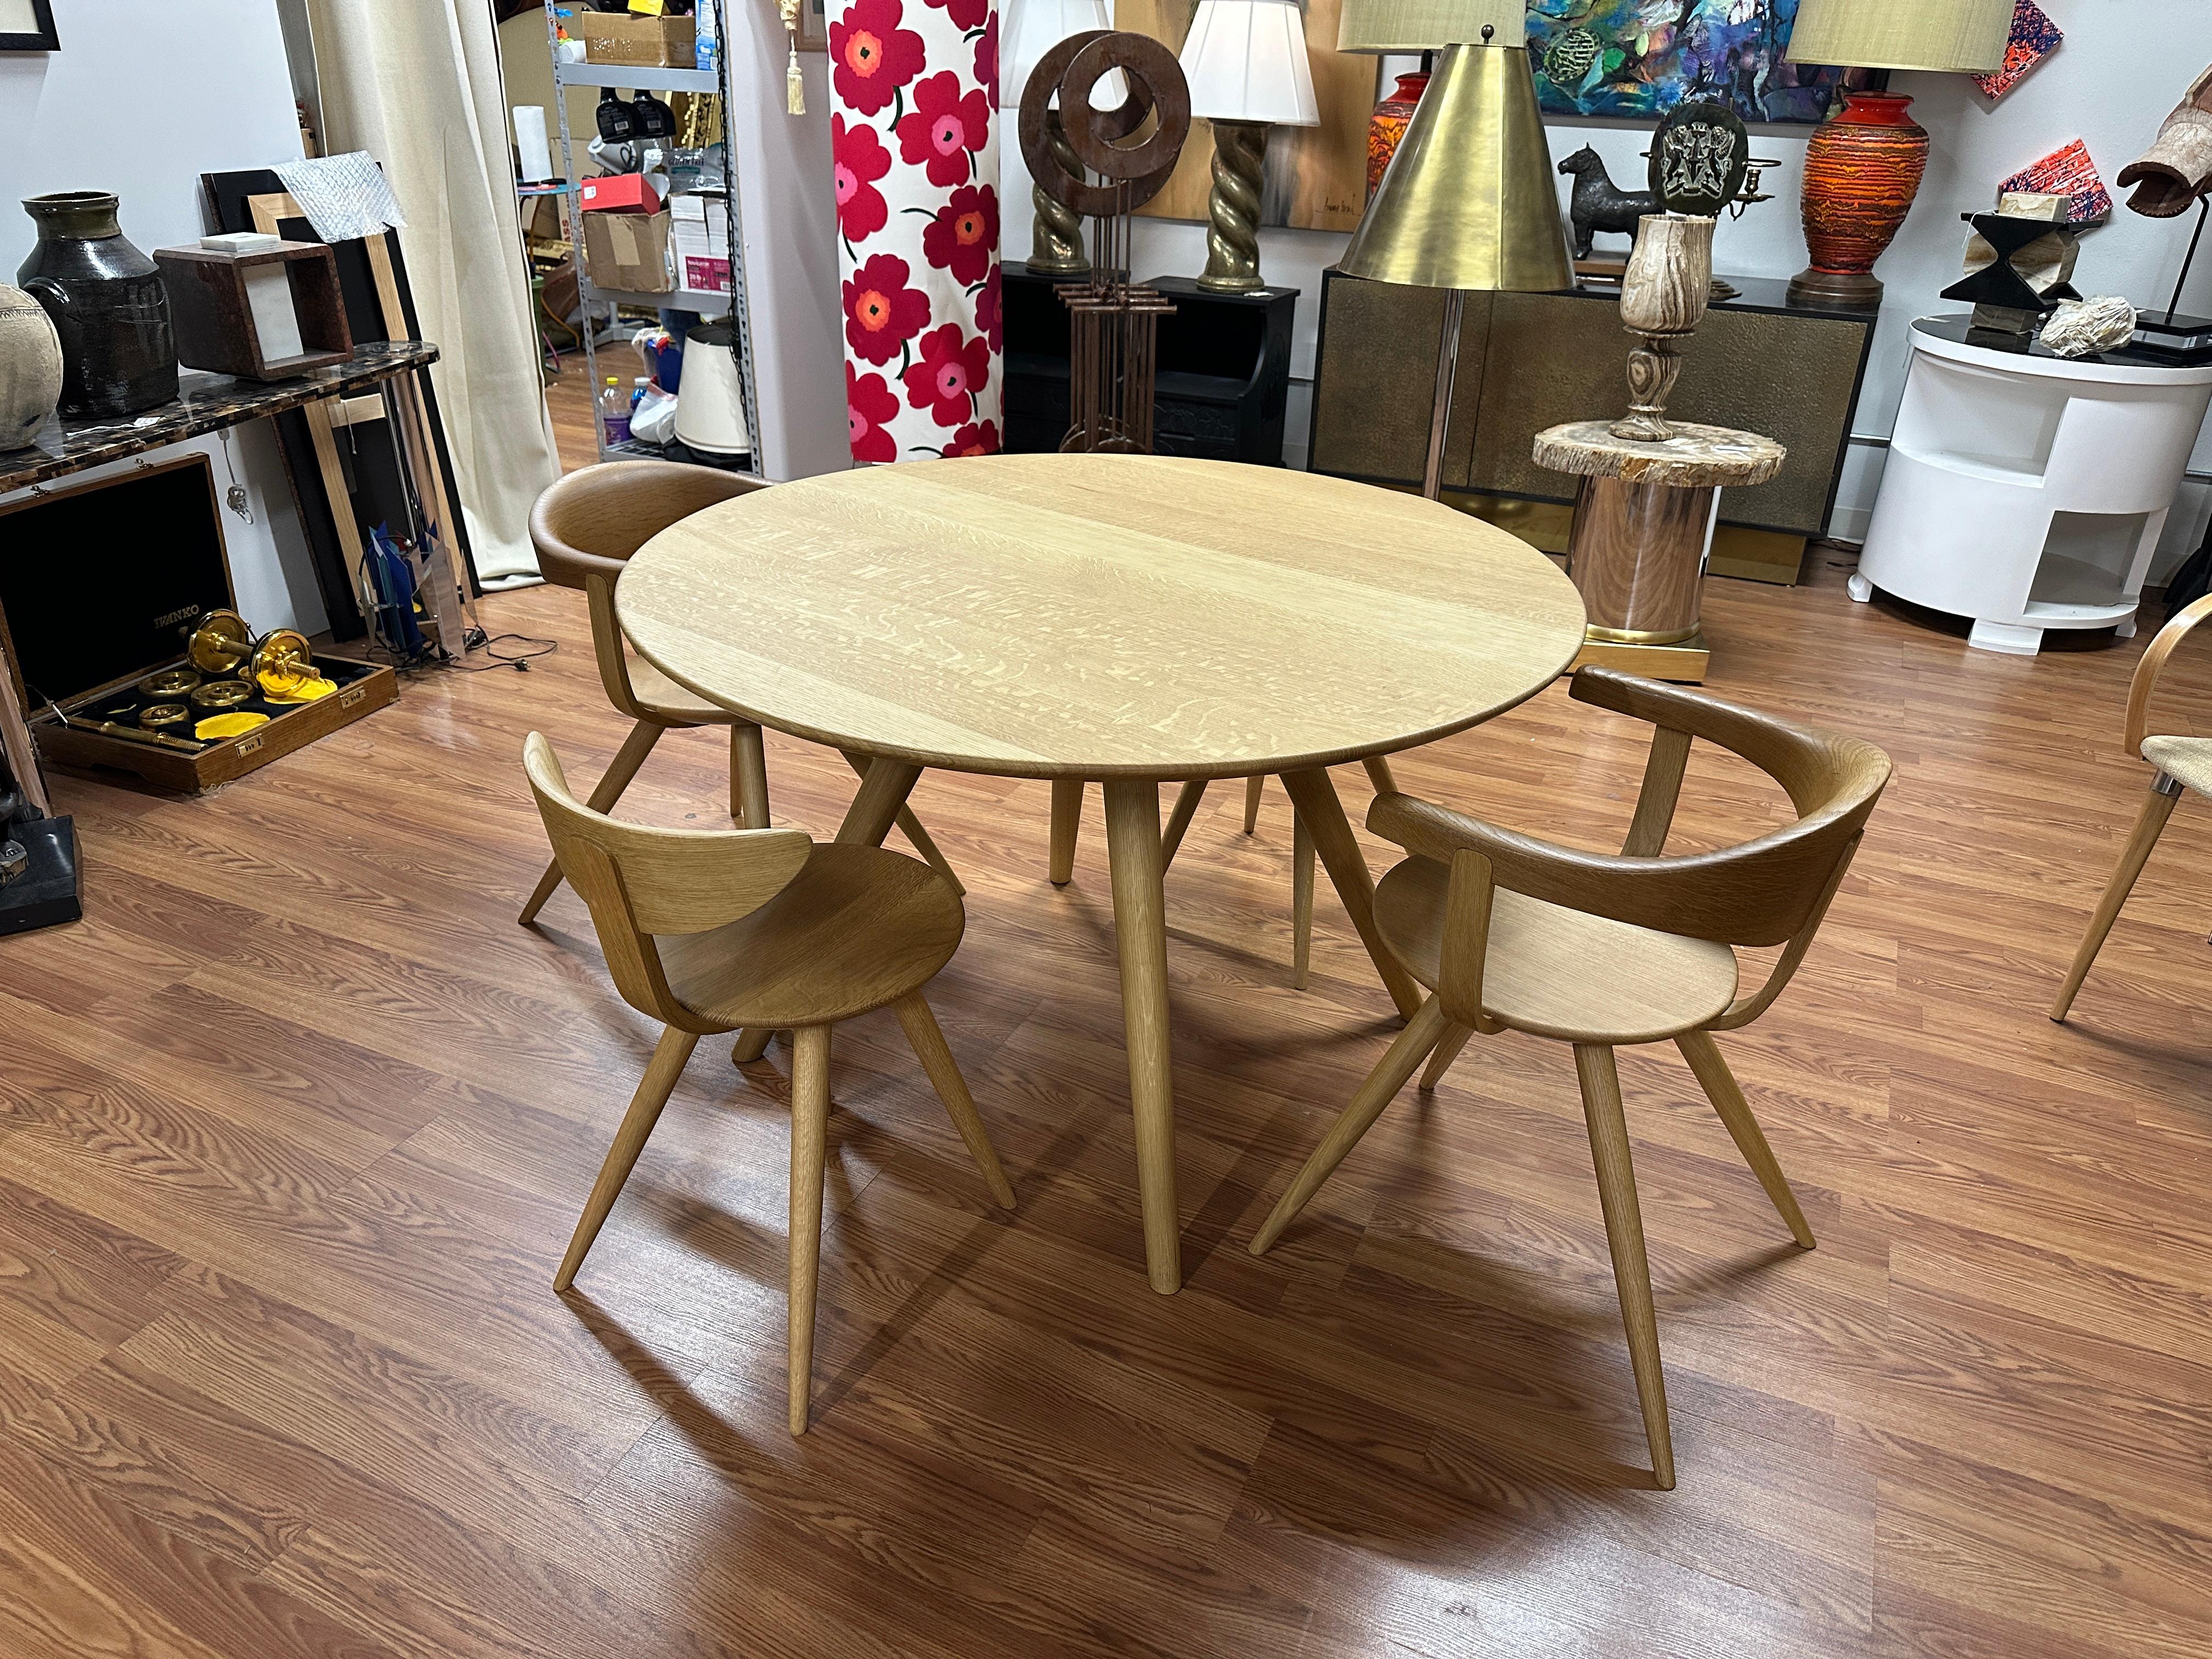 Sori Yonagi for Hida Bleached Oak Table and Chairs Reissue 2022 For Sale 11